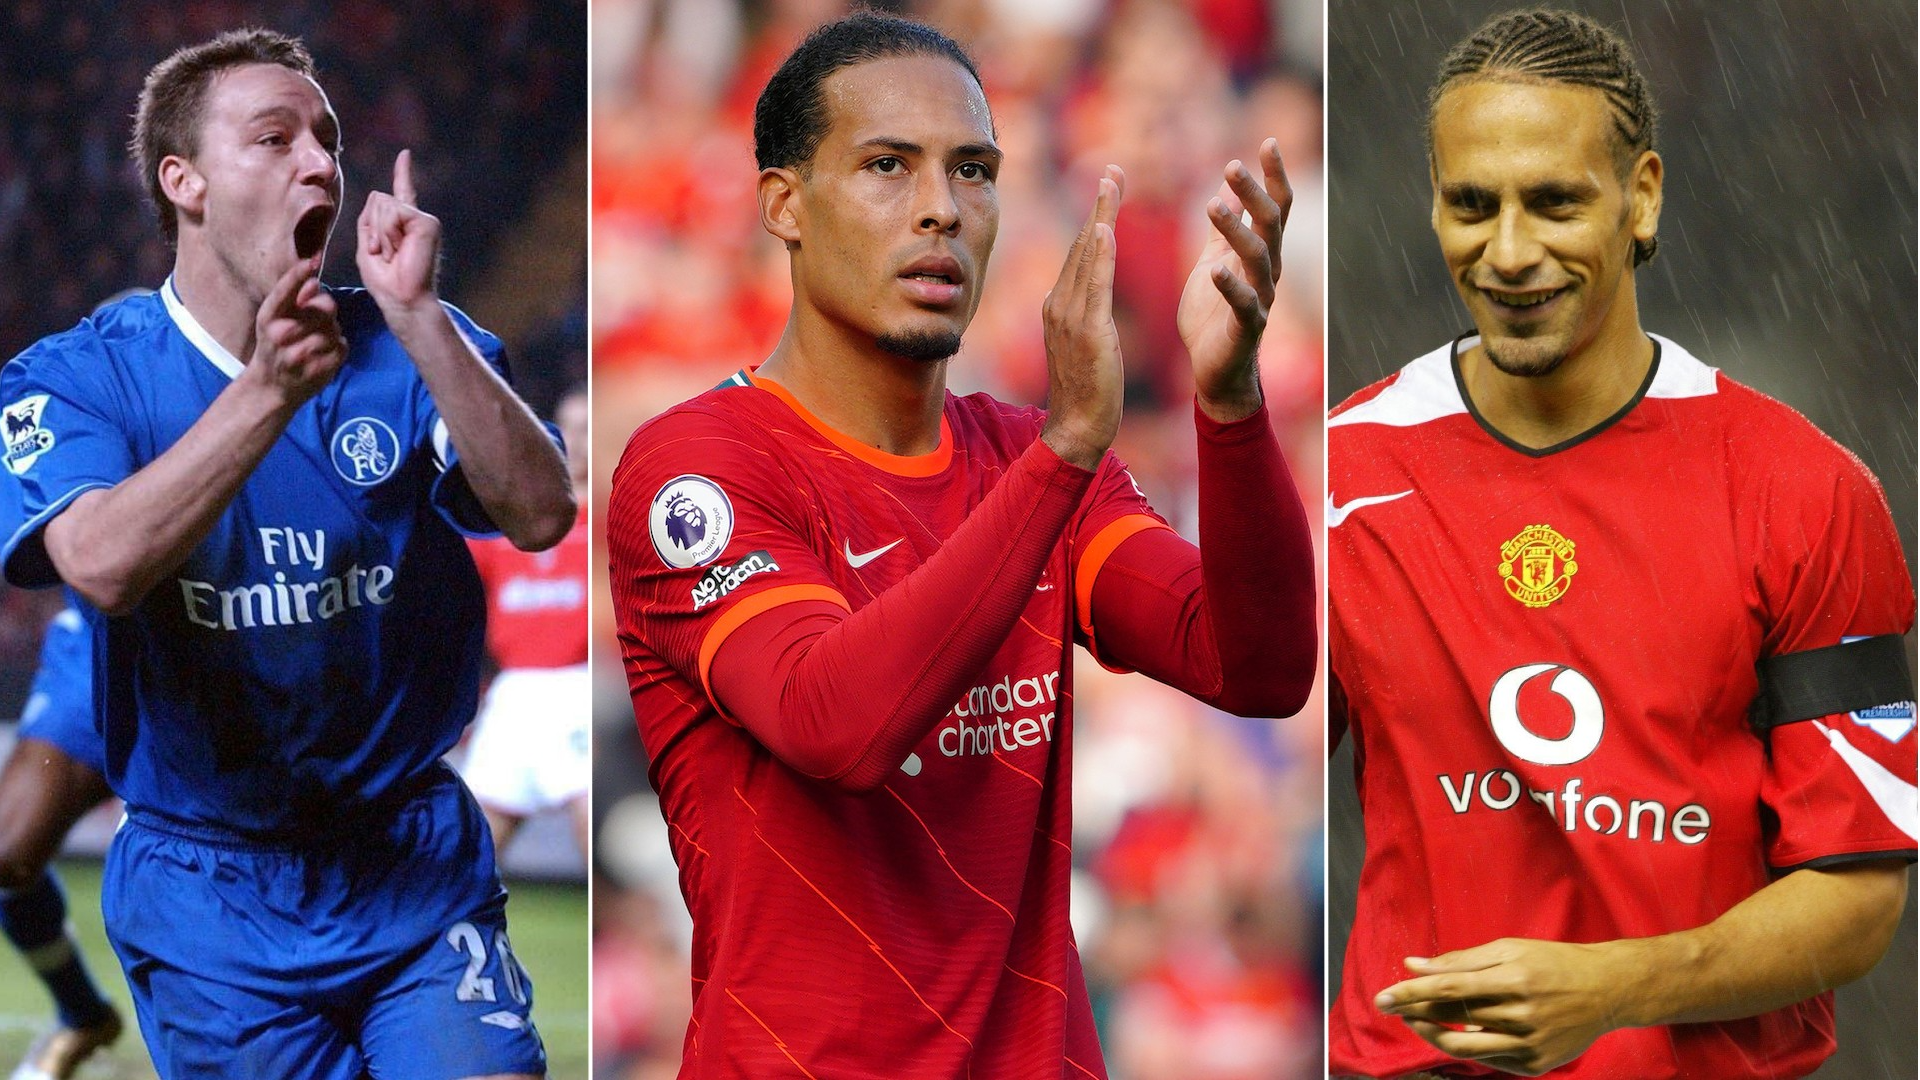 Ranking the 5 Best Arsenal Strikers of All-Time